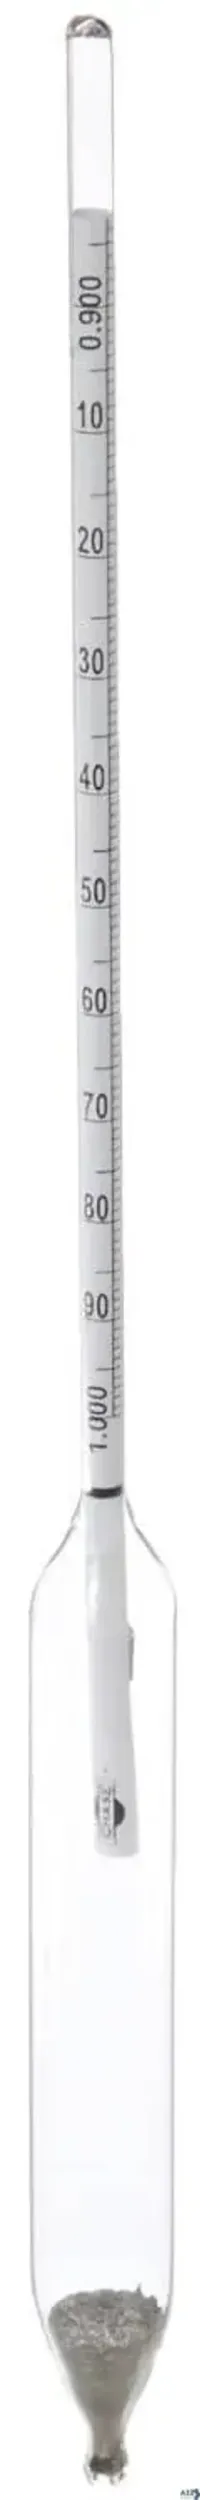 Chase Instruments 1912 SPECIFIC GRAVITY HYDROMETER, LIGHT